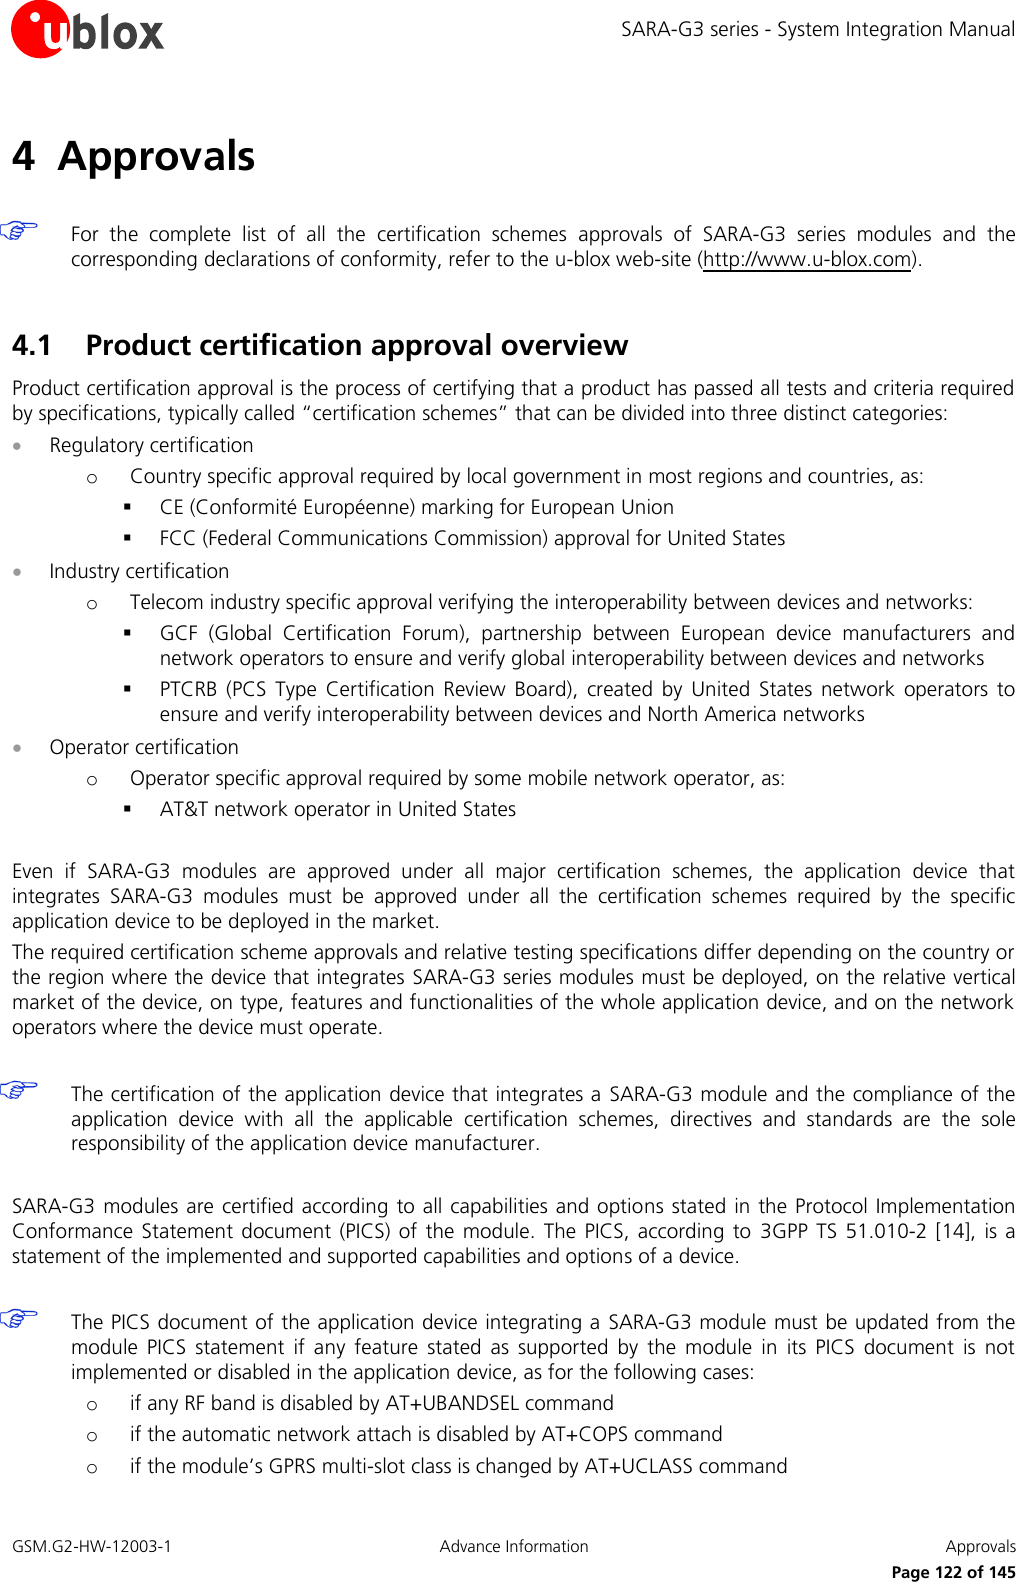 SARA-G3 series - System Integration Manual GSM.G2-HW-12003-1  Advance Information  Approvals     Page 122 of 145 4 Approvals   For  the  complete  list  of  all  the  certification  schemes  approvals  of  SARA-G3  series  modules  and  the corresponding declarations of conformity, refer to the u-blox web-site (http://www.u-blox.com).  4.1 Product certification approval overview Product certification approval is the process of certifying that a product has passed all tests and criteria required by specifications, typically called “certification schemes” that can be divided into three distinct categories:  Regulatory certification o Country specific approval required by local government in most regions and countries, as:  CE (Conformité Européenne) marking for European Union  FCC (Federal Communications Commission) approval for United States  Industry certification o Telecom industry specific approval verifying the interoperability between devices and networks:  GCF  (Global  Certification  Forum),  partnership  between  European  device  manufacturers  and network operators to ensure and verify global interoperability between devices and networks  PTCRB  (PCS  Type  Certification  Review  Board),  created  by  United  States  network  operators  to ensure and verify interoperability between devices and North America networks  Operator certification o Operator specific approval required by some mobile network operator, as:  AT&amp;T network operator in United States  Even  if  SARA-G3  modules  are  approved  under  all  major  certification  schemes,  the  application  device  that integrates  SARA-G3  modules  must  be  approved  under  all  the  certification  schemes  required  by  the  specific application device to be deployed in the market. The required certification scheme approvals and relative testing specifications differ depending on the country or the region where the device that integrates SARA-G3 series modules must be deployed, on the relative vertical market of the device, on type, features and functionalities of the whole application device, and on the network operators where the device must operate.   The certification of the application device that integrates a  SARA-G3 module and the compliance of the application  device  with  all  the  applicable  certification  schemes,  directives  and  standards  are  the  sole responsibility of the application device manufacturer.  SARA-G3 modules  are certified according to all capabilities and options stated in the Protocol  Implementation Conformance  Statement  document  (PICS)  of  the  module. The  PICS,  according  to  3GPP  TS  51.010-2  [14],  is  a statement of the implemented and supported capabilities and options of a device.   The PICS document of the application device integrating a  SARA-G3 module must be updated from the module  PICS  statement  if  any  feature  stated  as  supported  by  the  module  in  its  PICS  document  is  not implemented or disabled in the application device, as for the following cases: o if any RF band is disabled by AT+UBANDSEL command  o if the automatic network attach is disabled by AT+COPS command o if the module’s GPRS multi-slot class is changed by AT+UCLASS command   